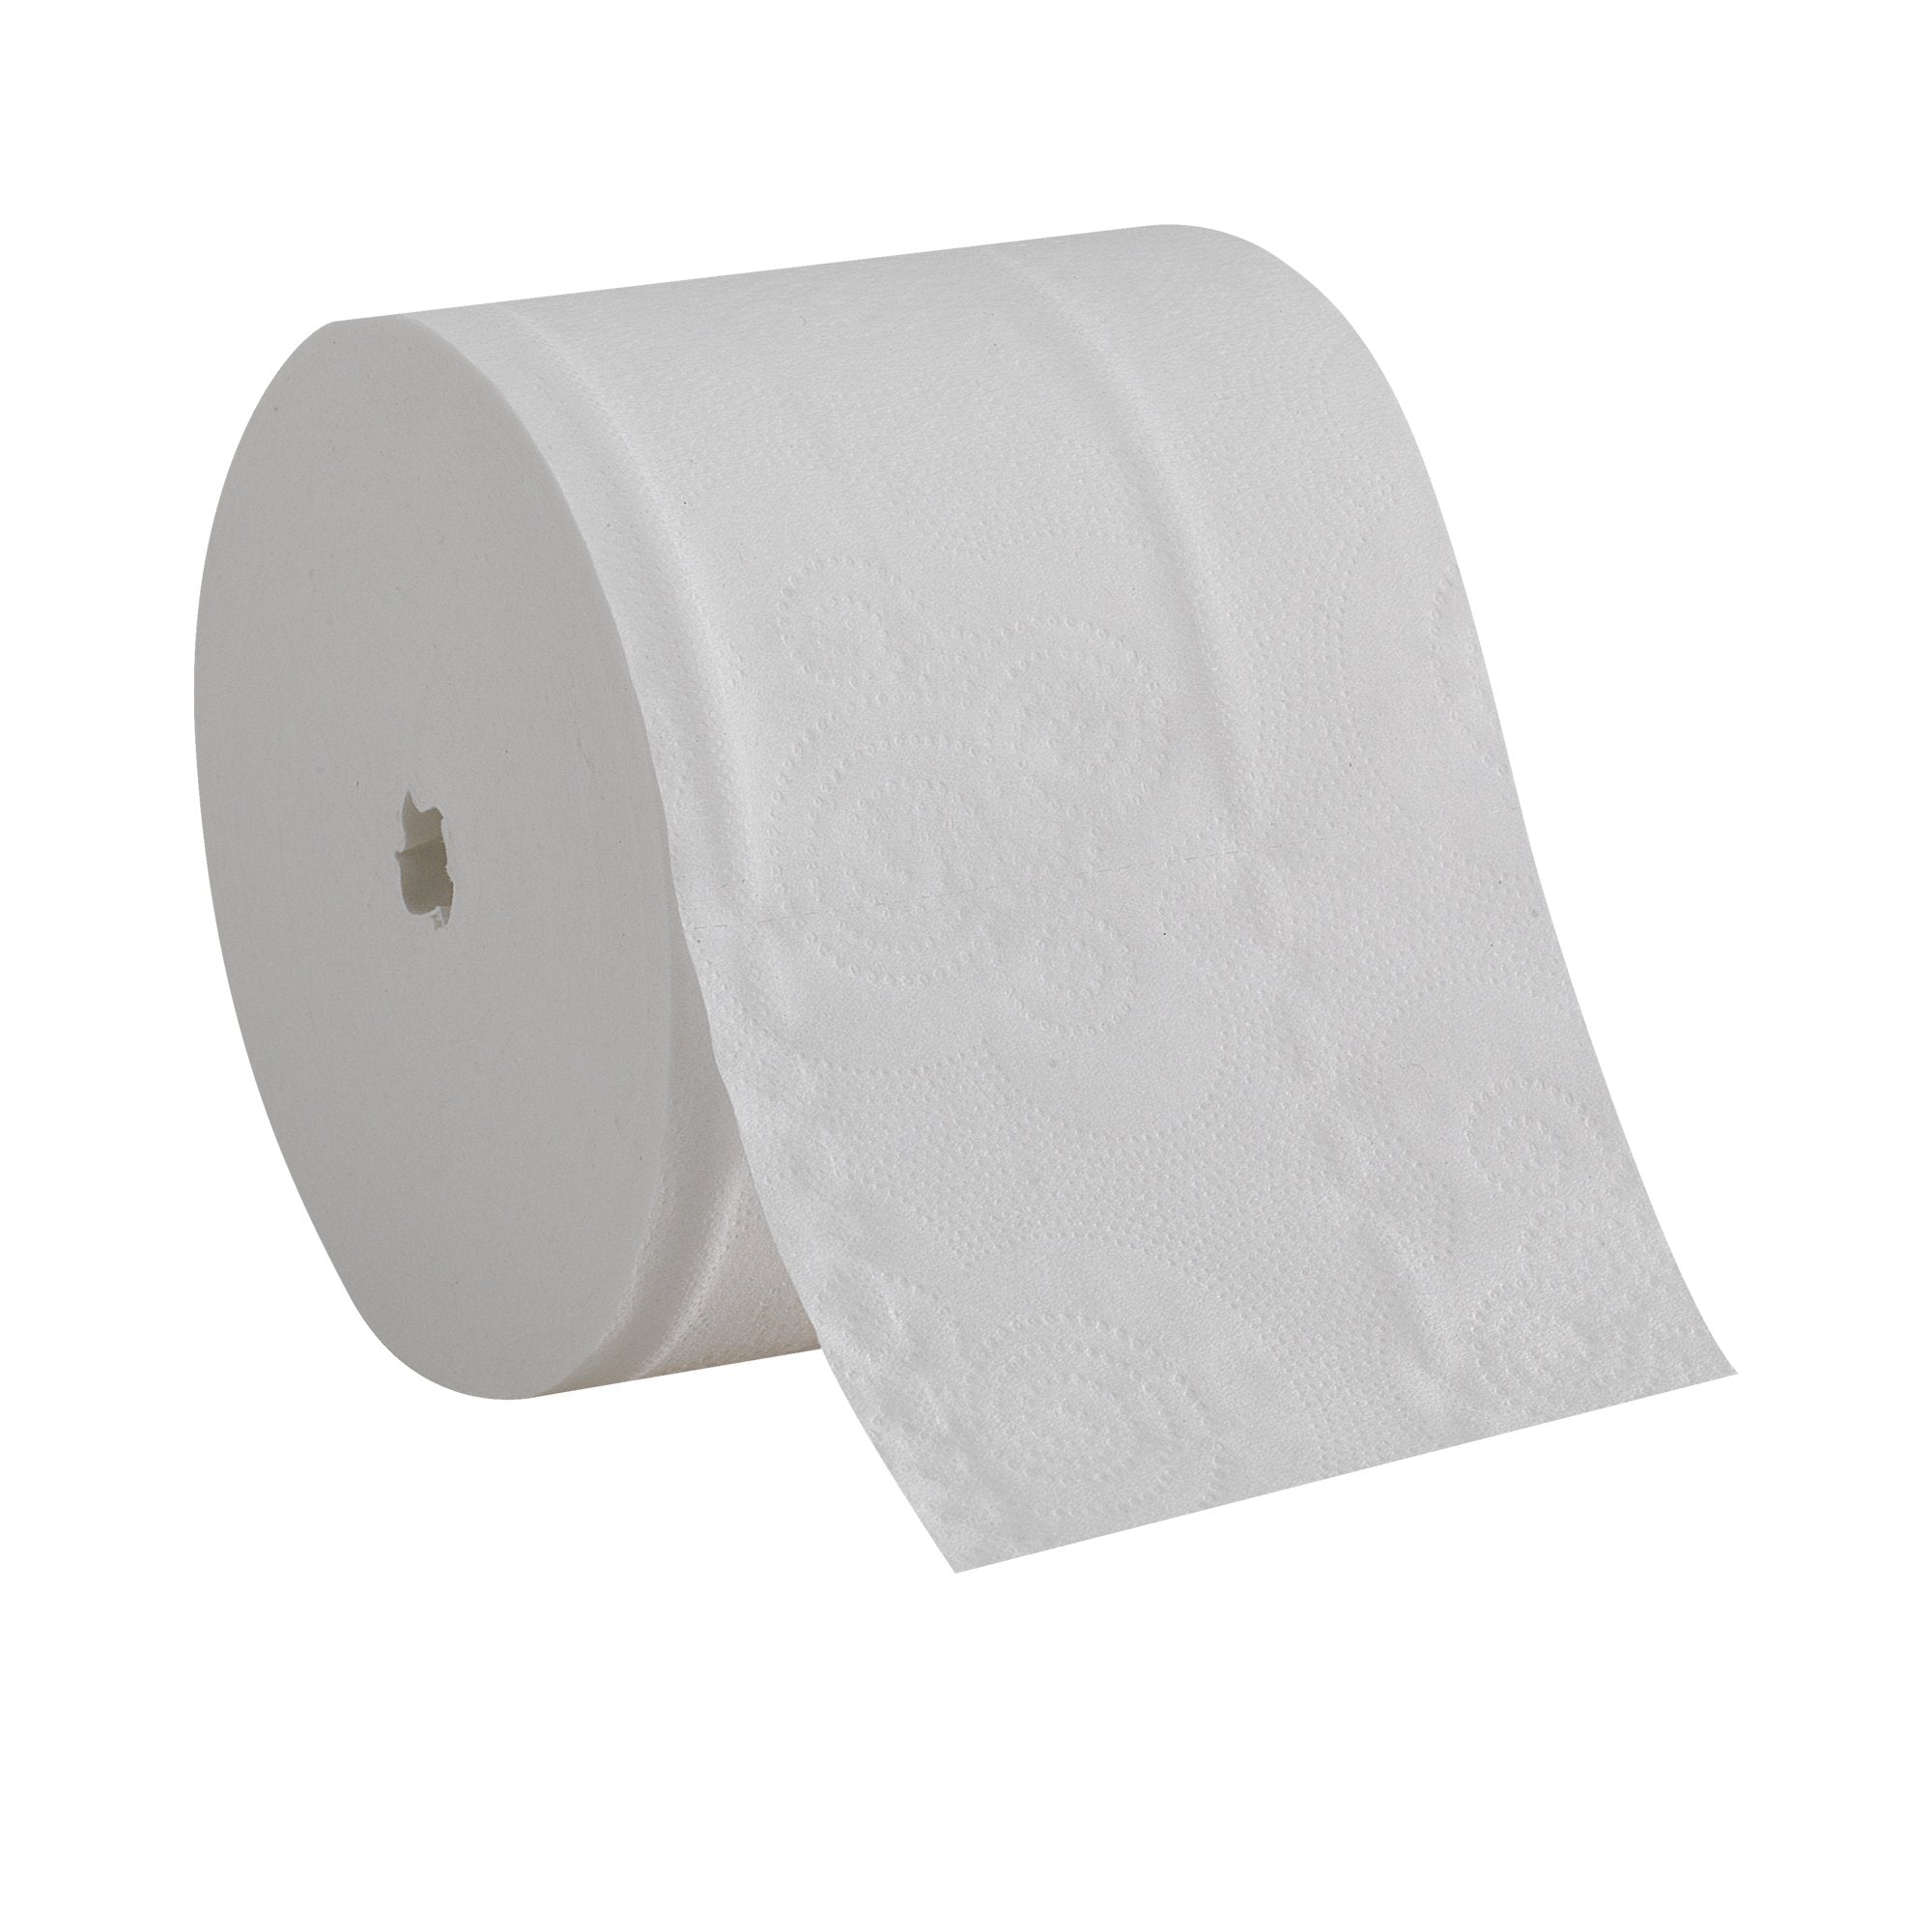 Toilet Tissue Angel Soft Professional Series® Compact White 2-Ply Standard Size Coreless Roll 750 Sheets 3-4/5 X 4-1/20 Inch